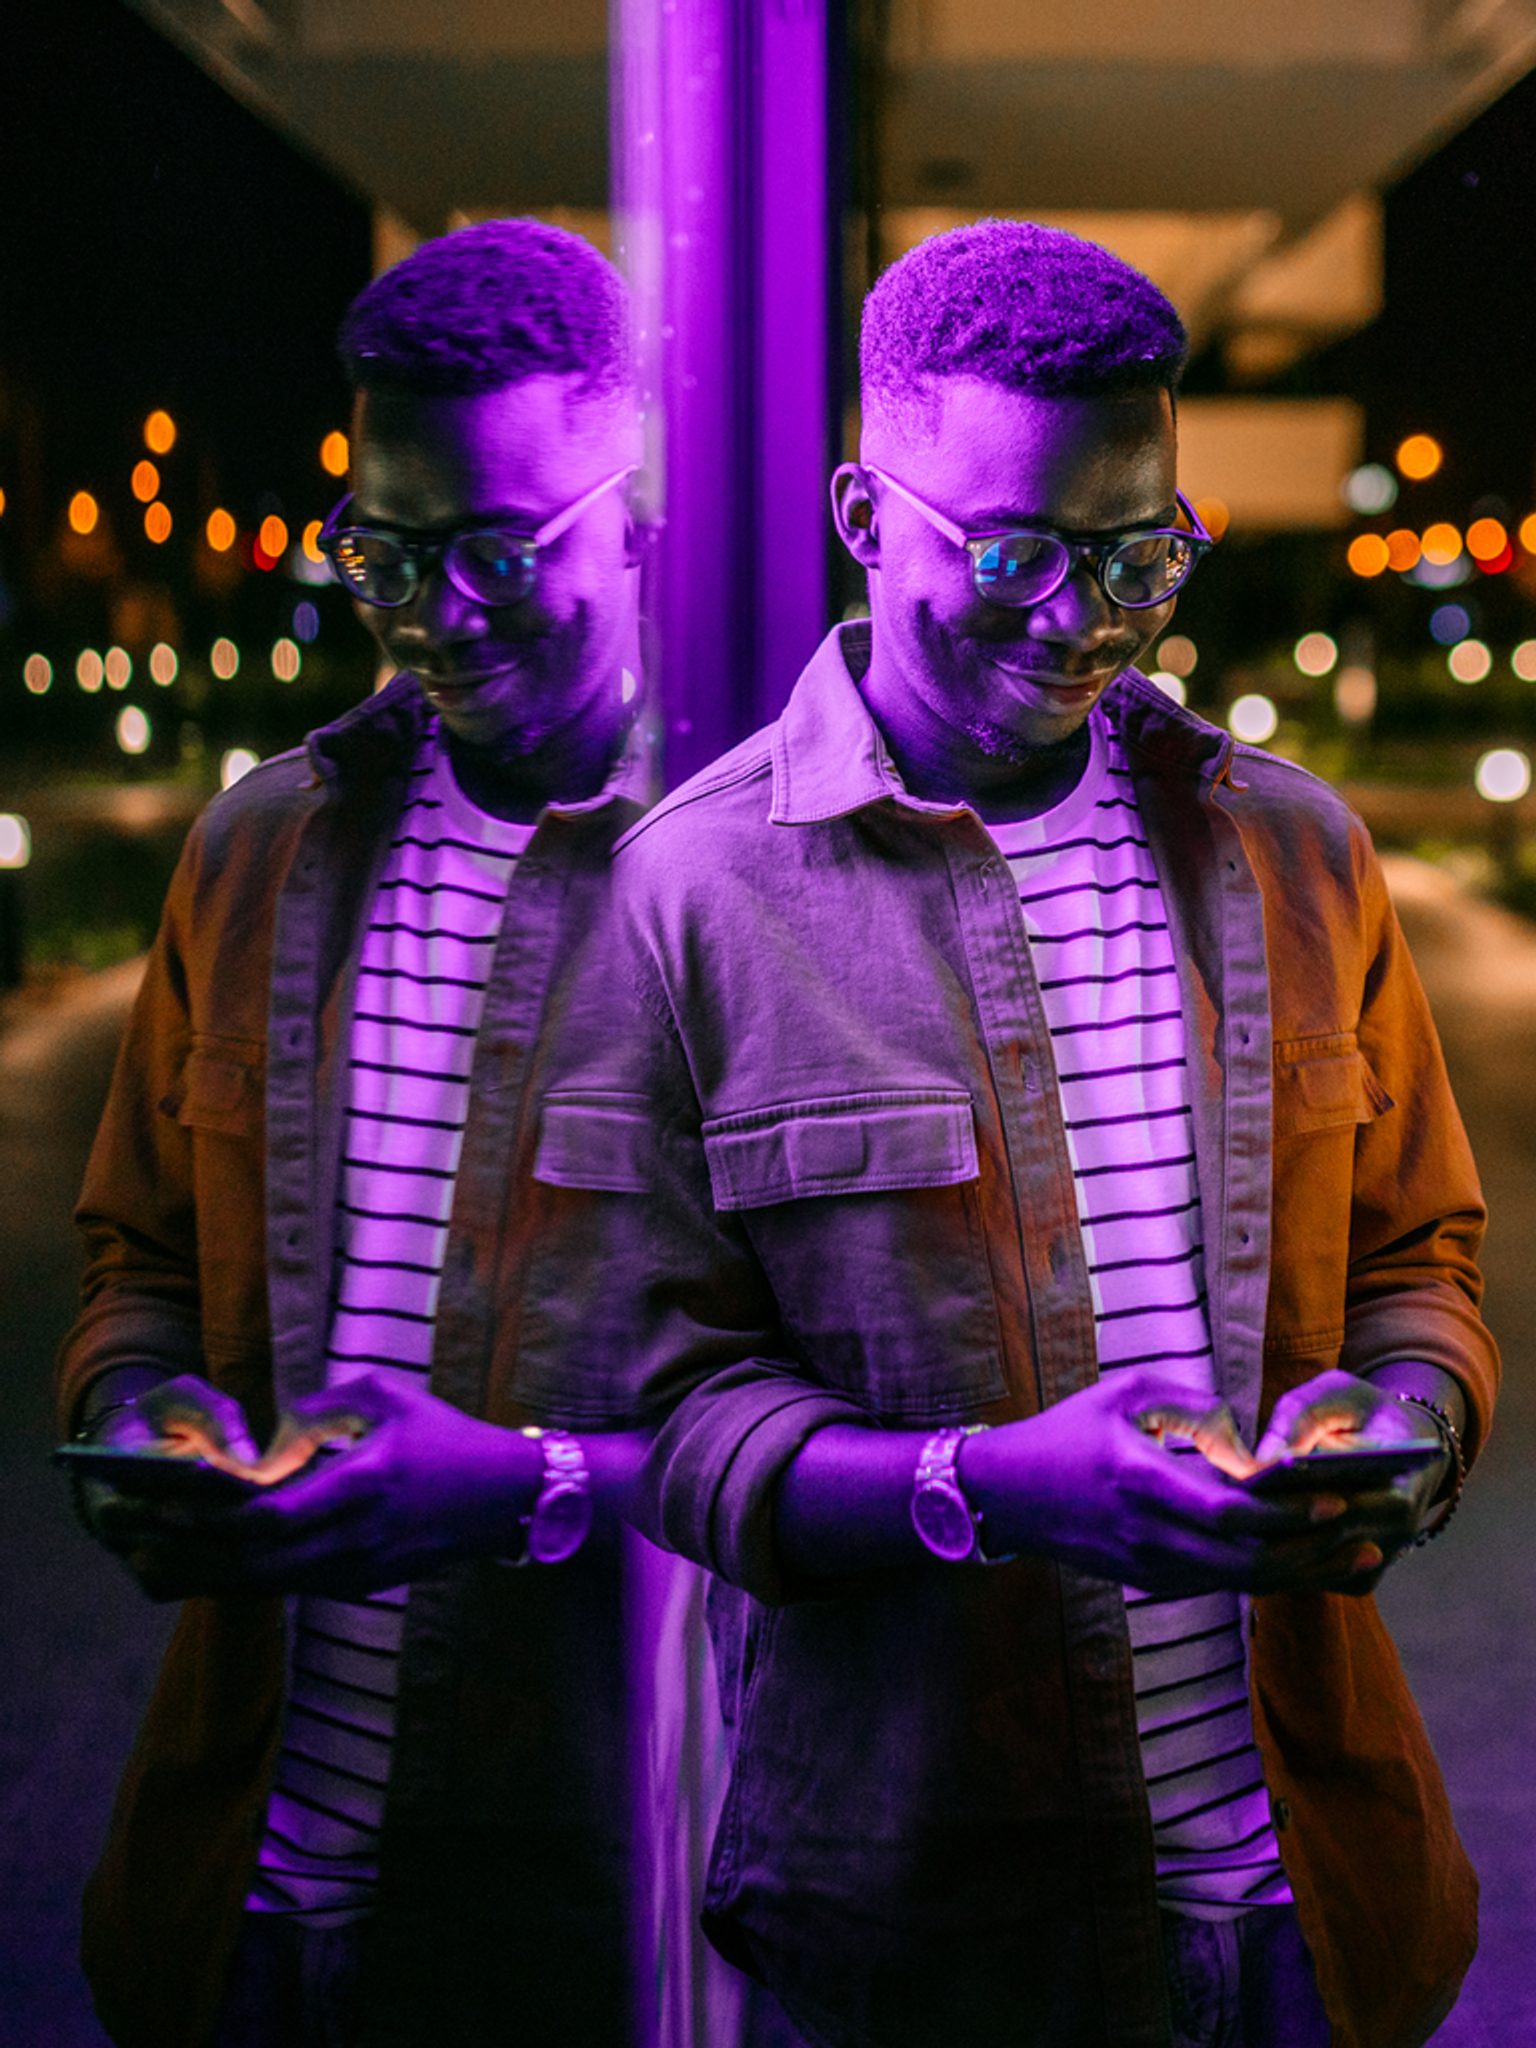 A person's double exposure portrait with neon purple lighting, looking at a smartphone at night.